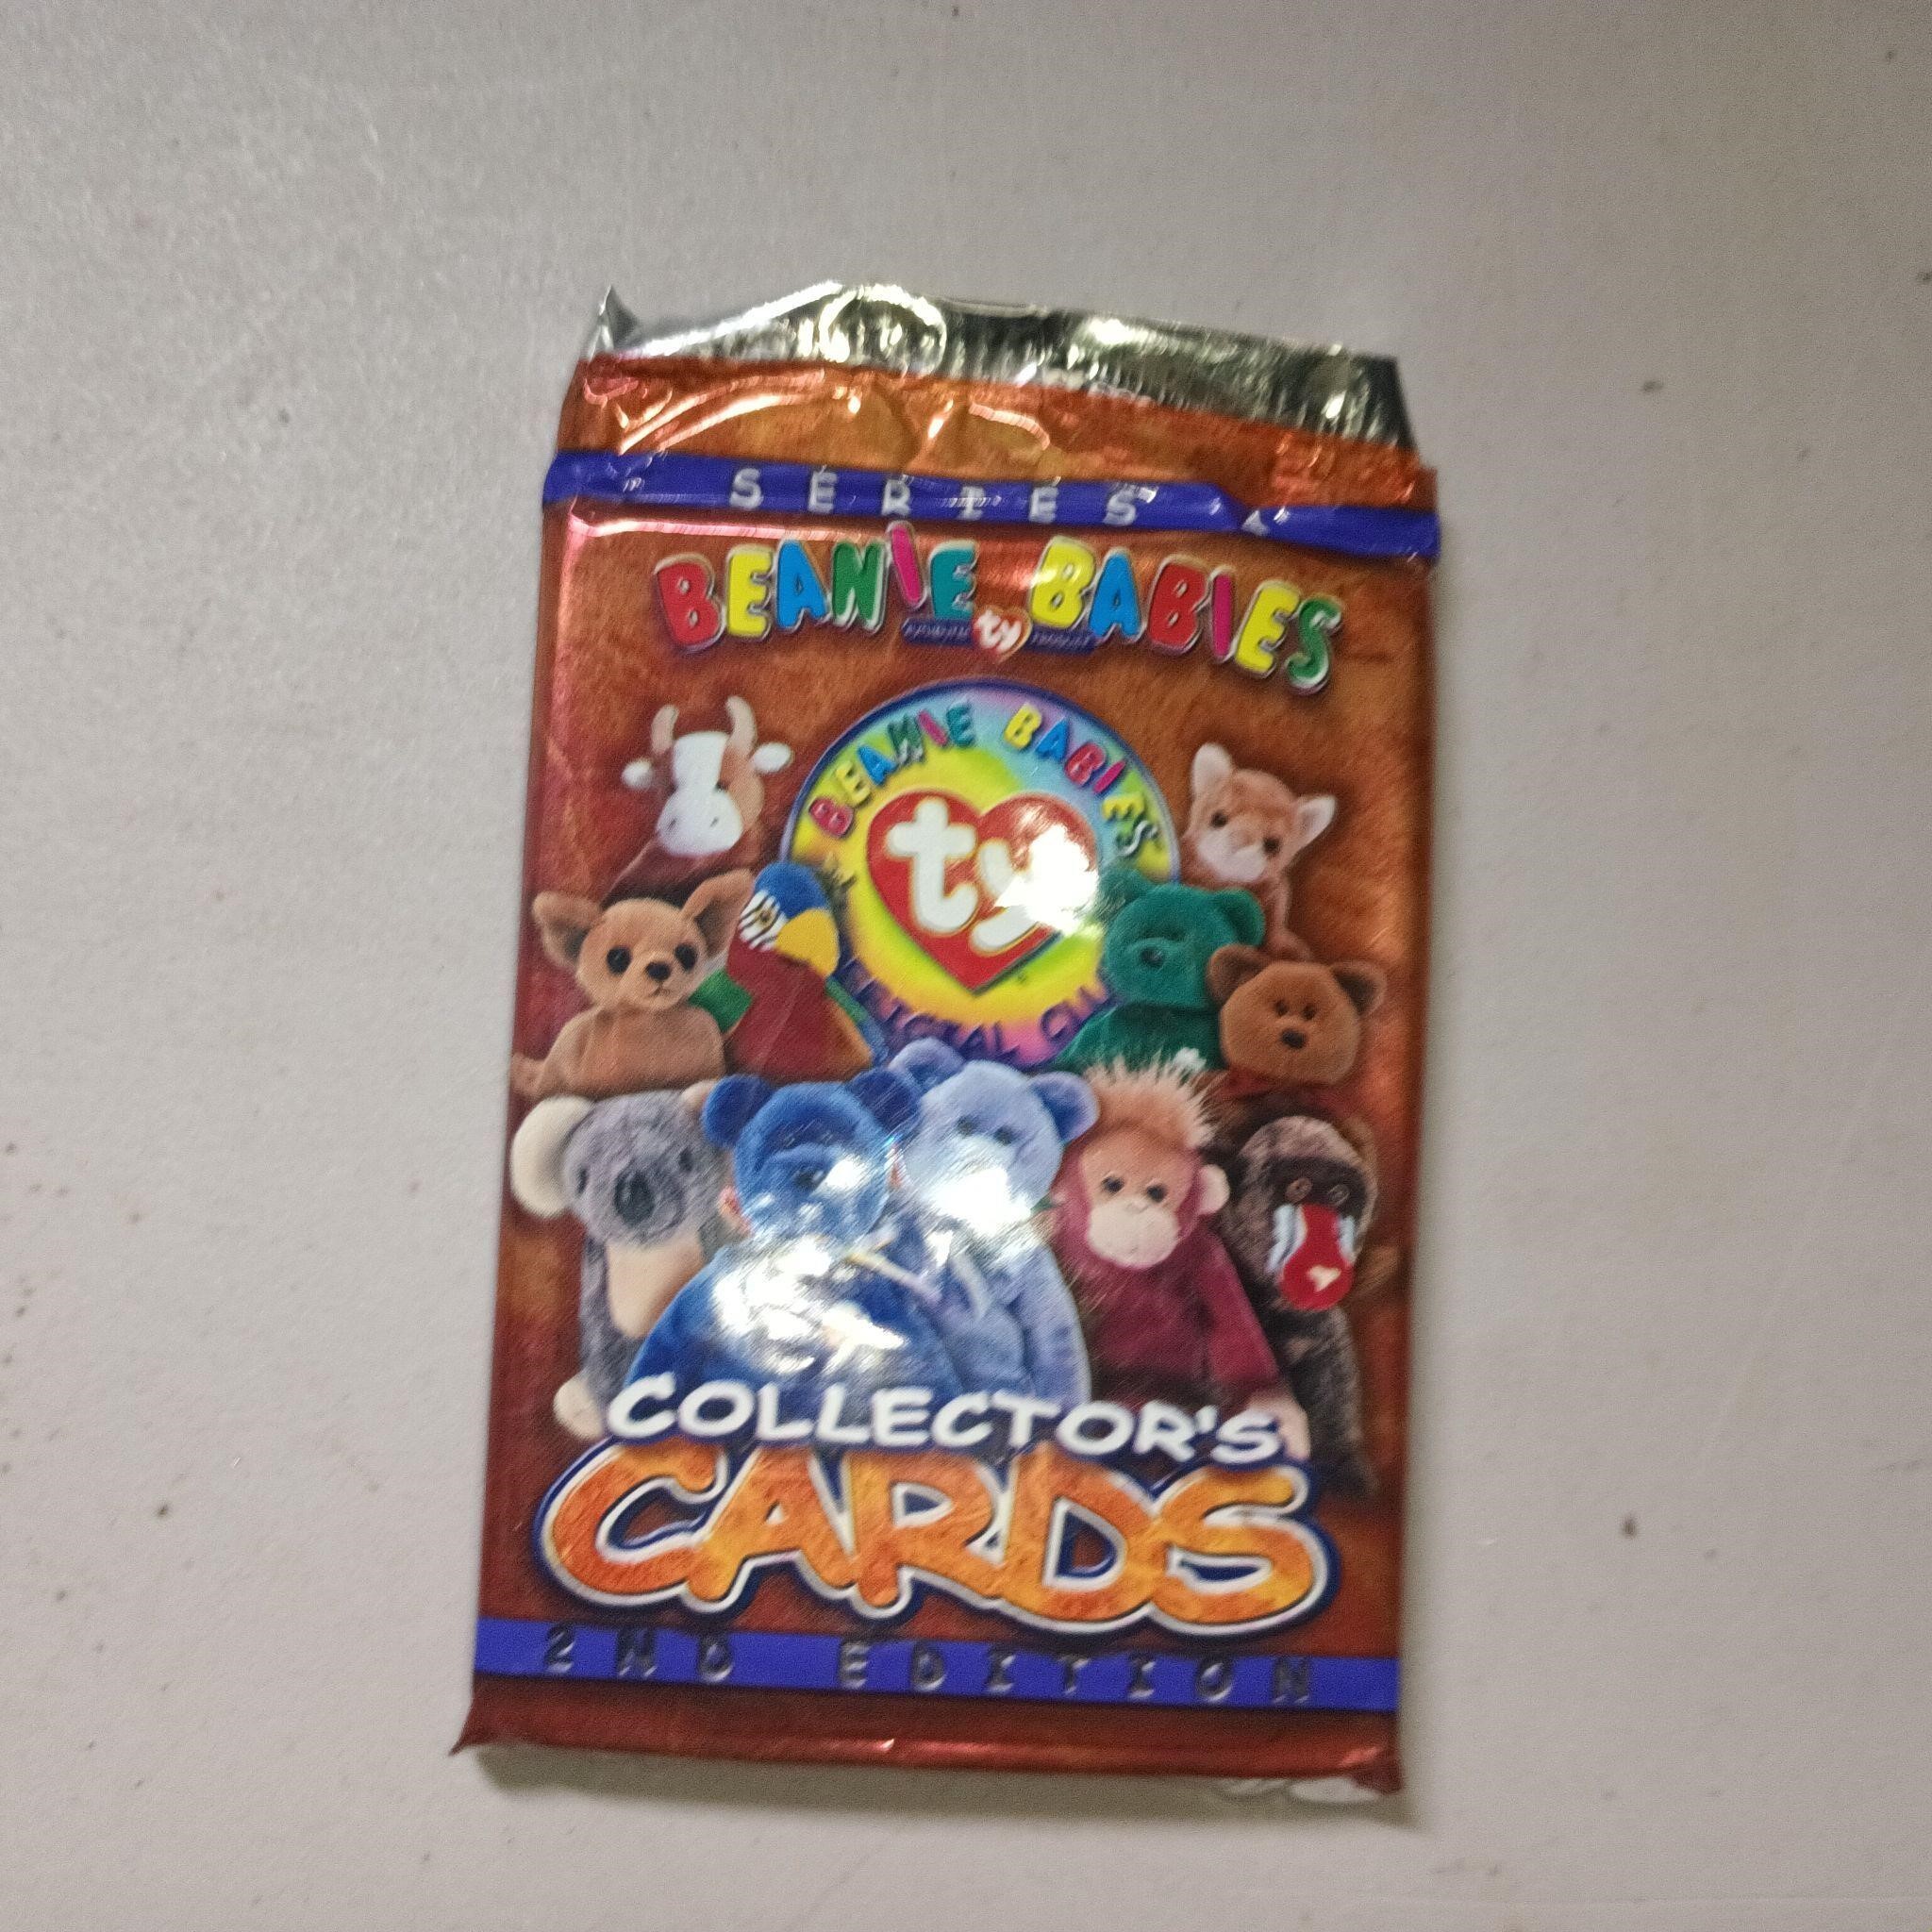 Beanie babies trading card unsealed pack